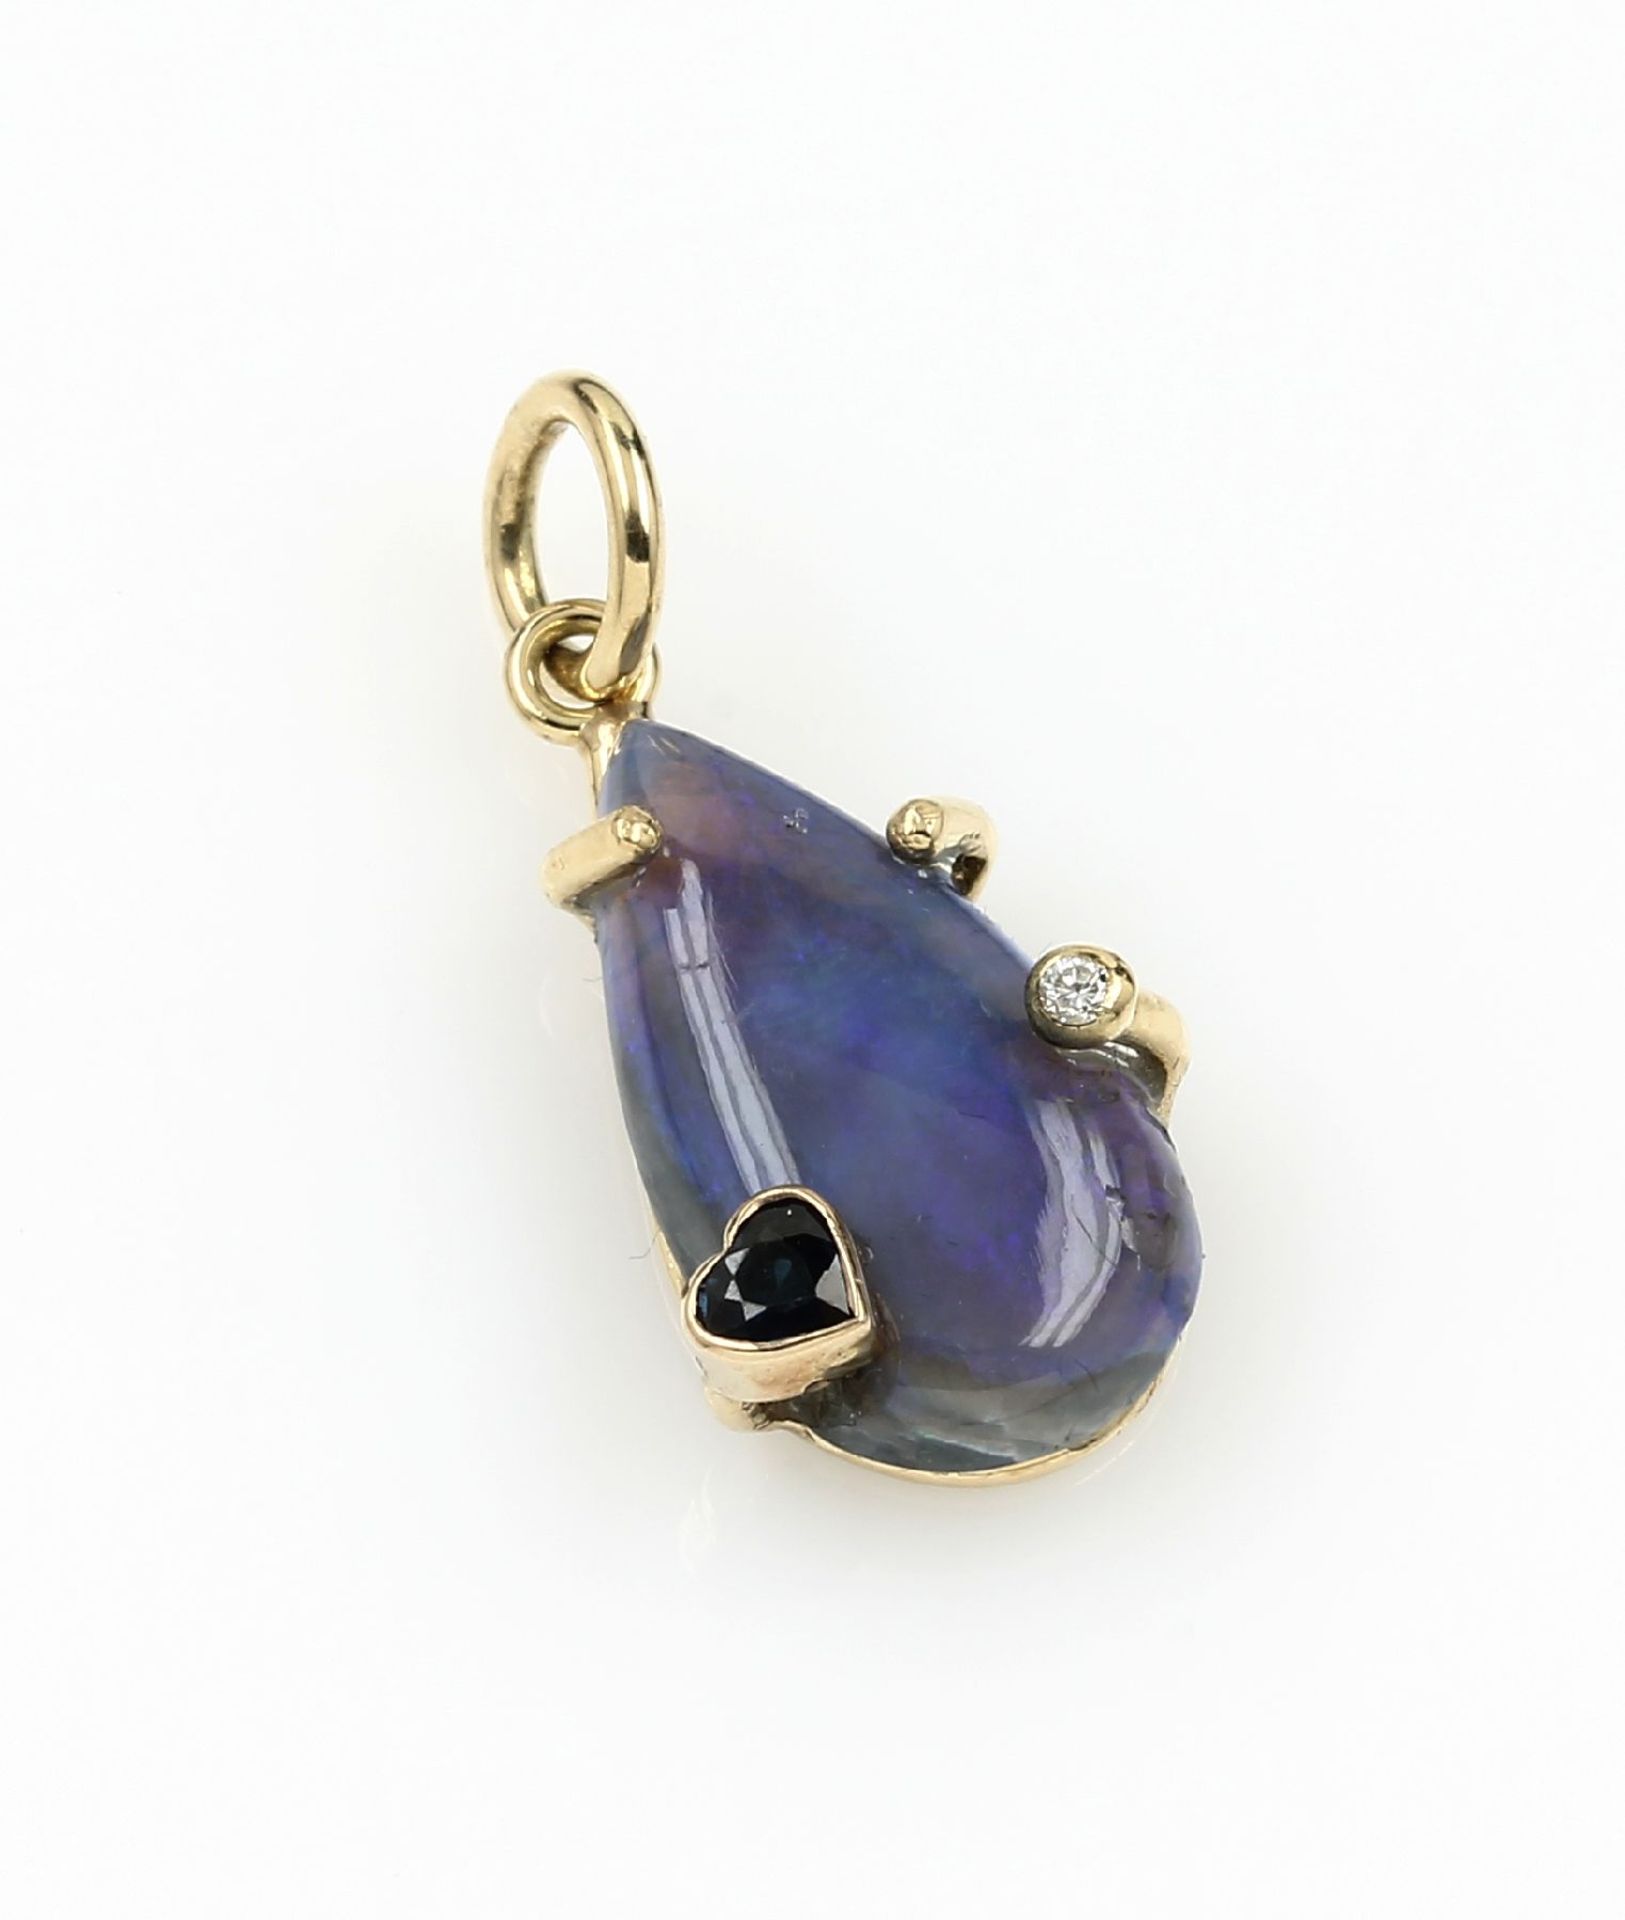 14 kt gold pendant with opal, diamond and sapphire , YG 585/000, centered pearformed opalcabochon